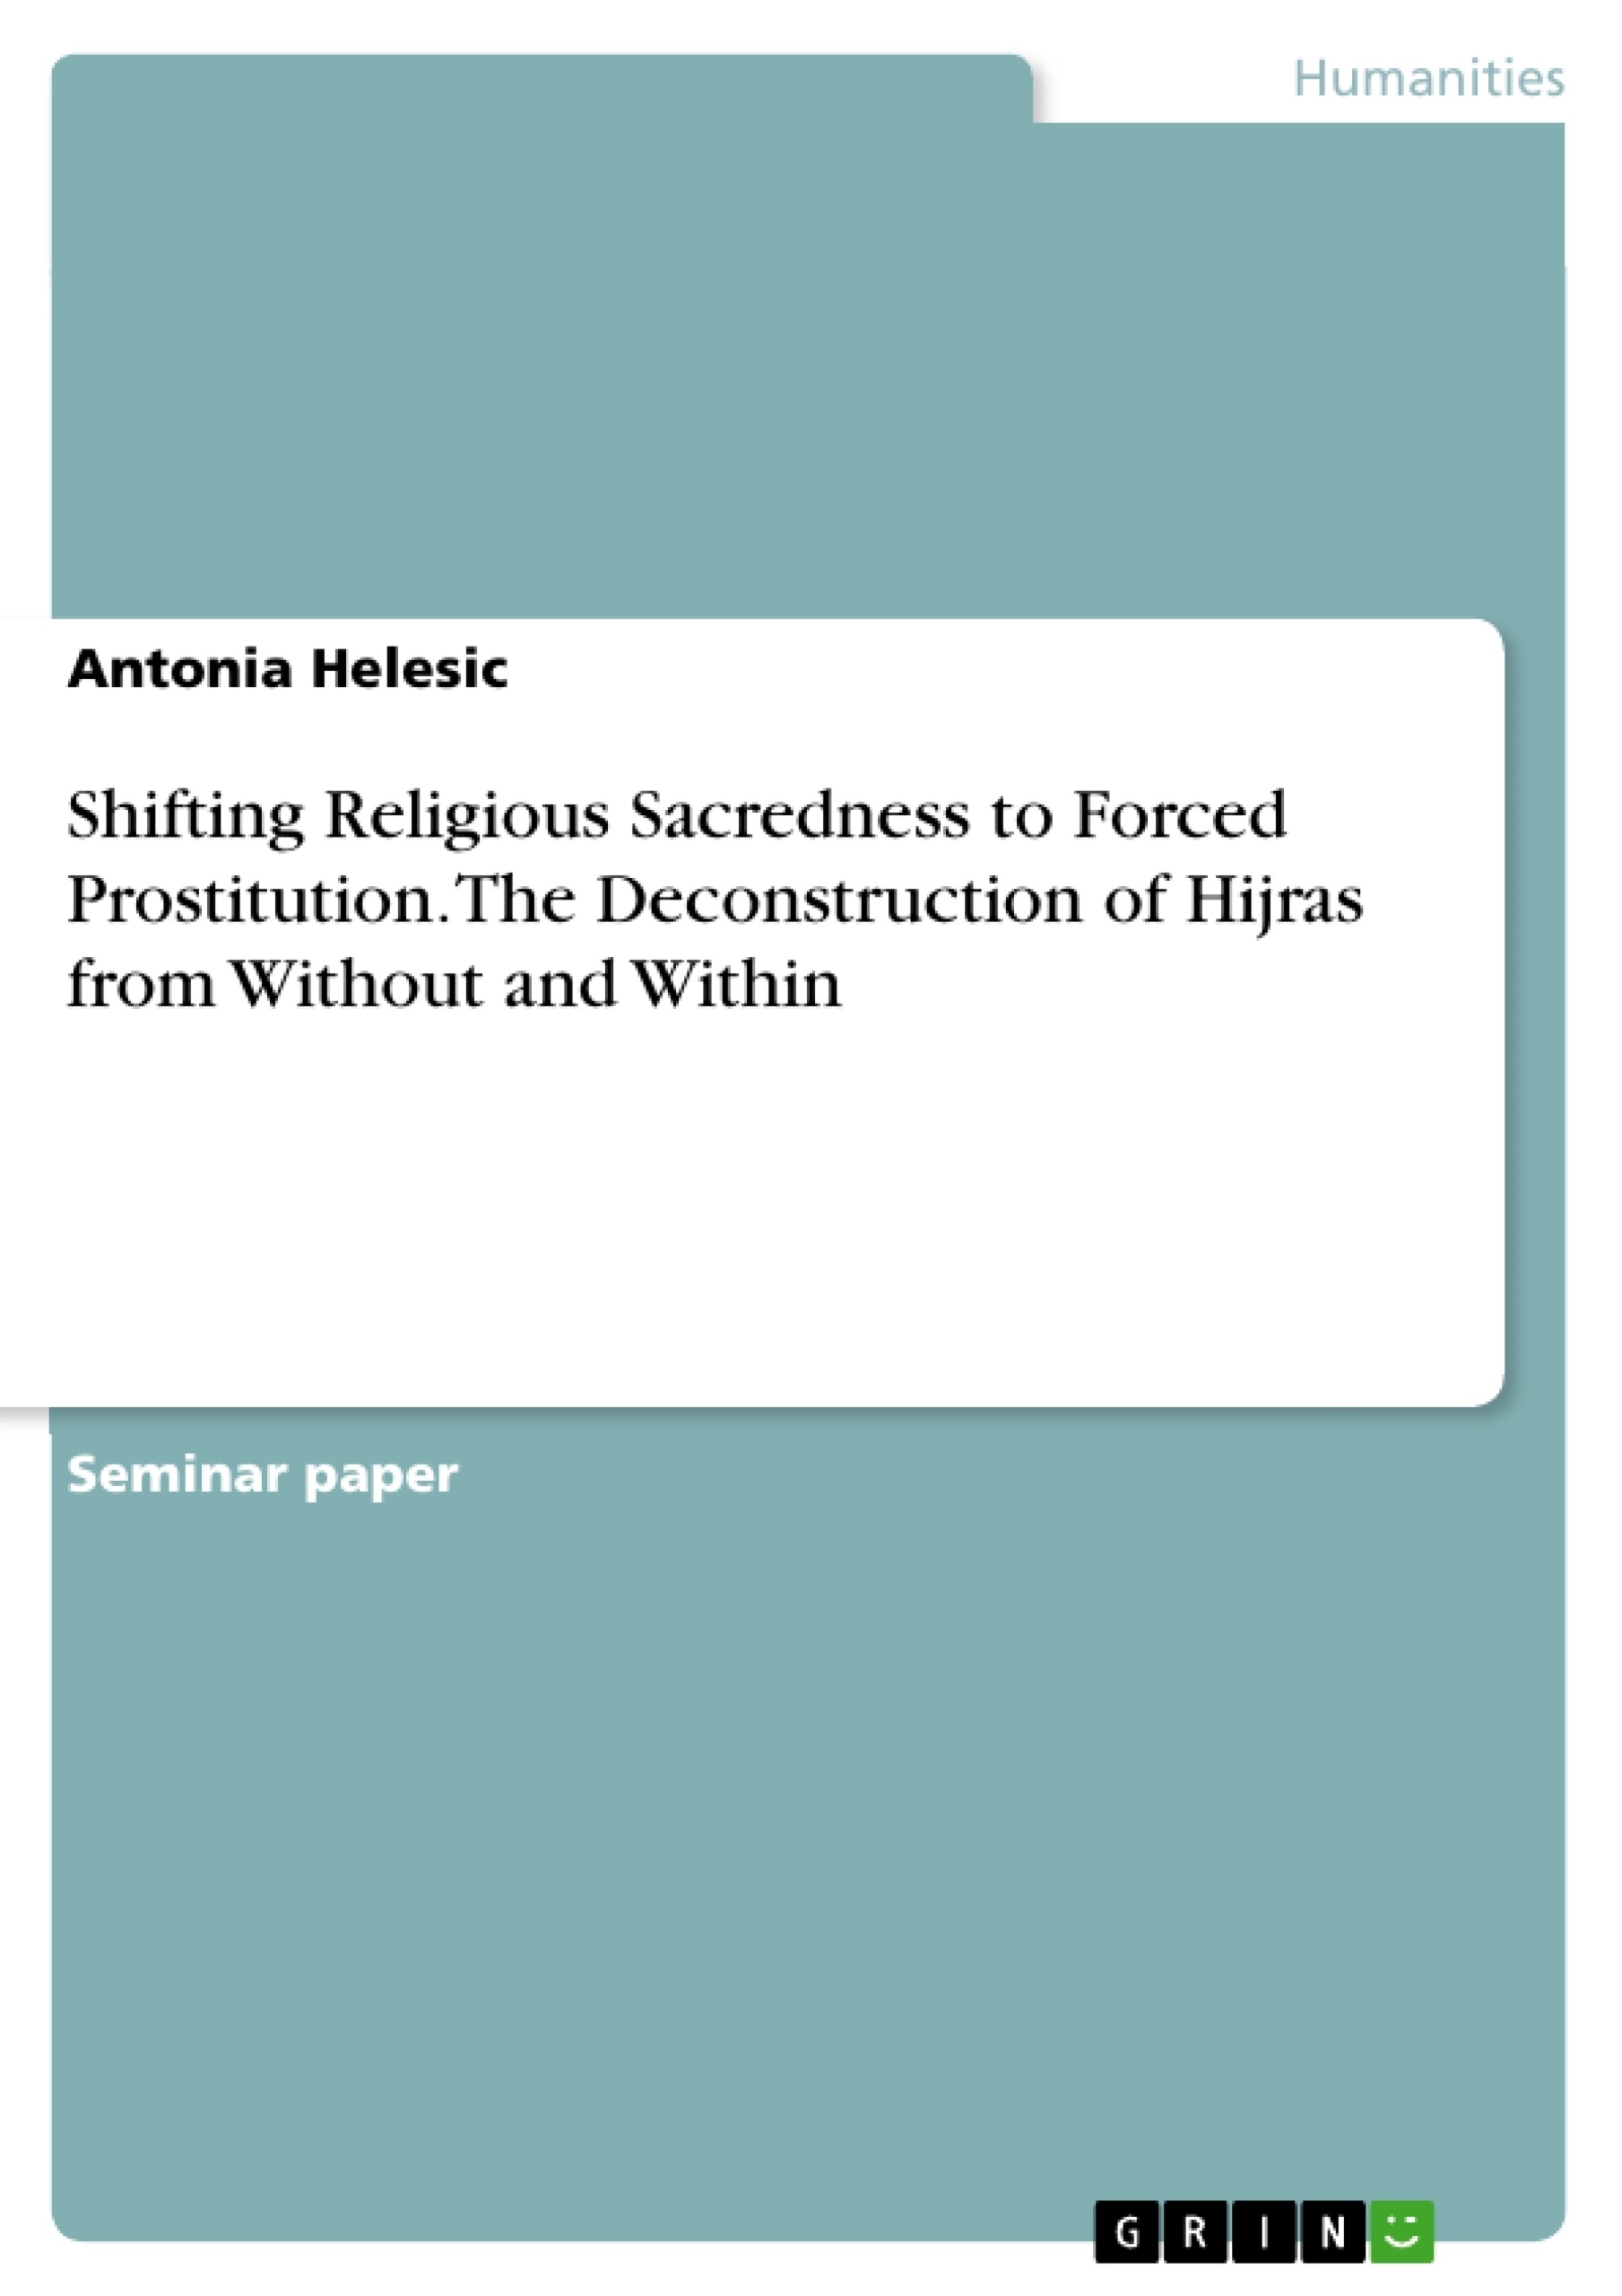 Título: Shifting Religious Sacredness to Forced Prostitution. The Deconstruction of Hijras from Without and Within